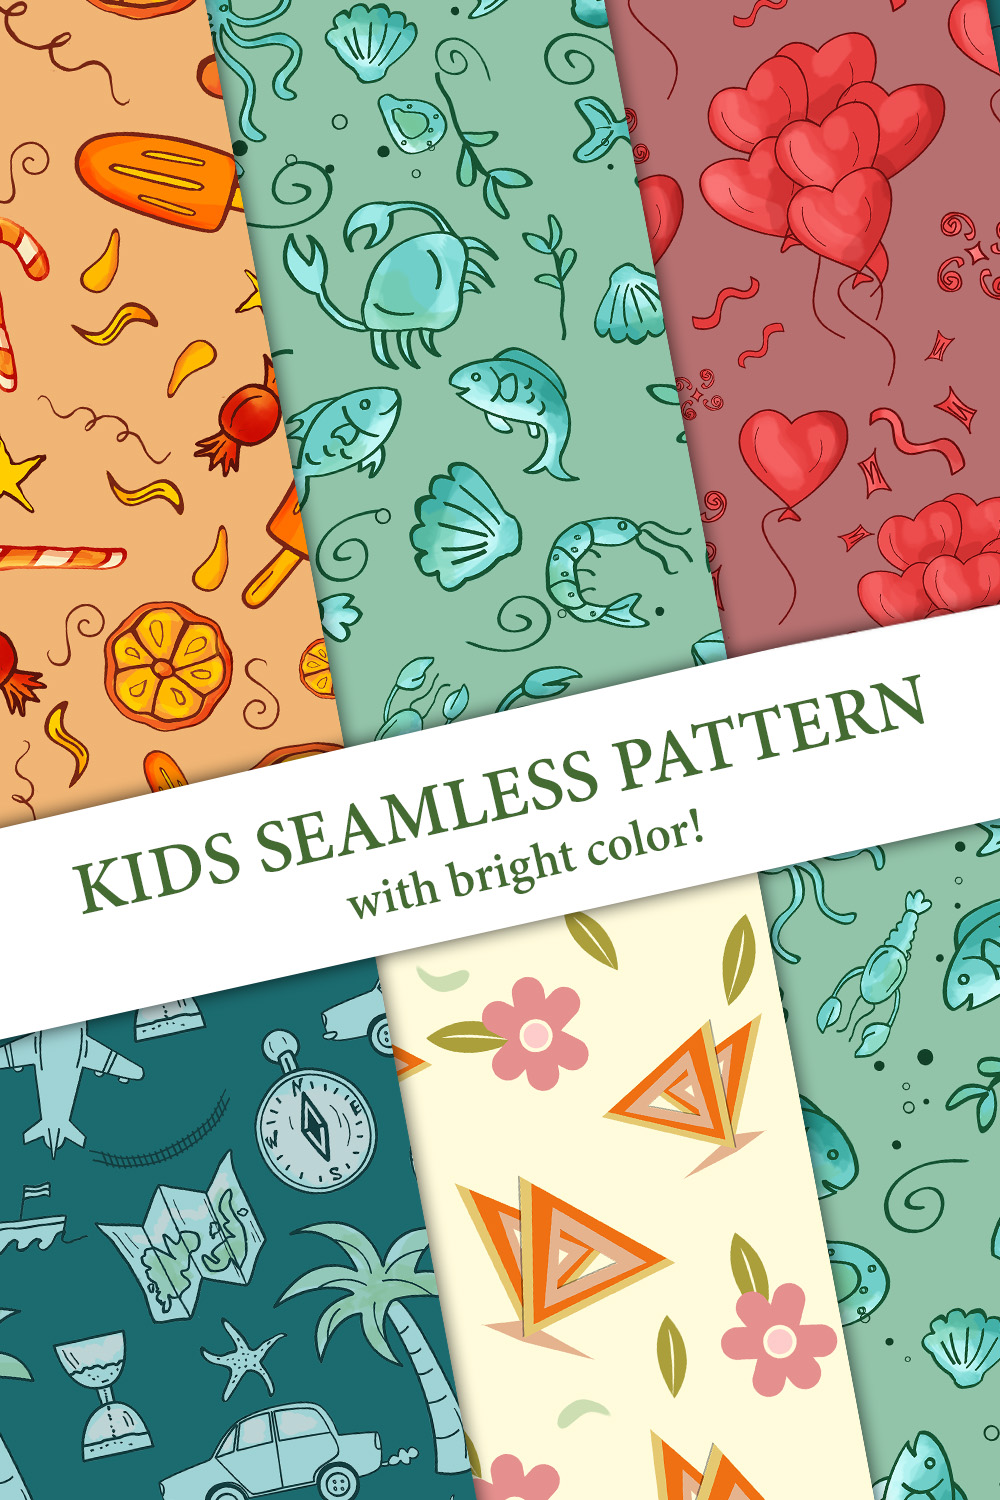 Adorable and playful Kids seamless pattern pinterest preview image.